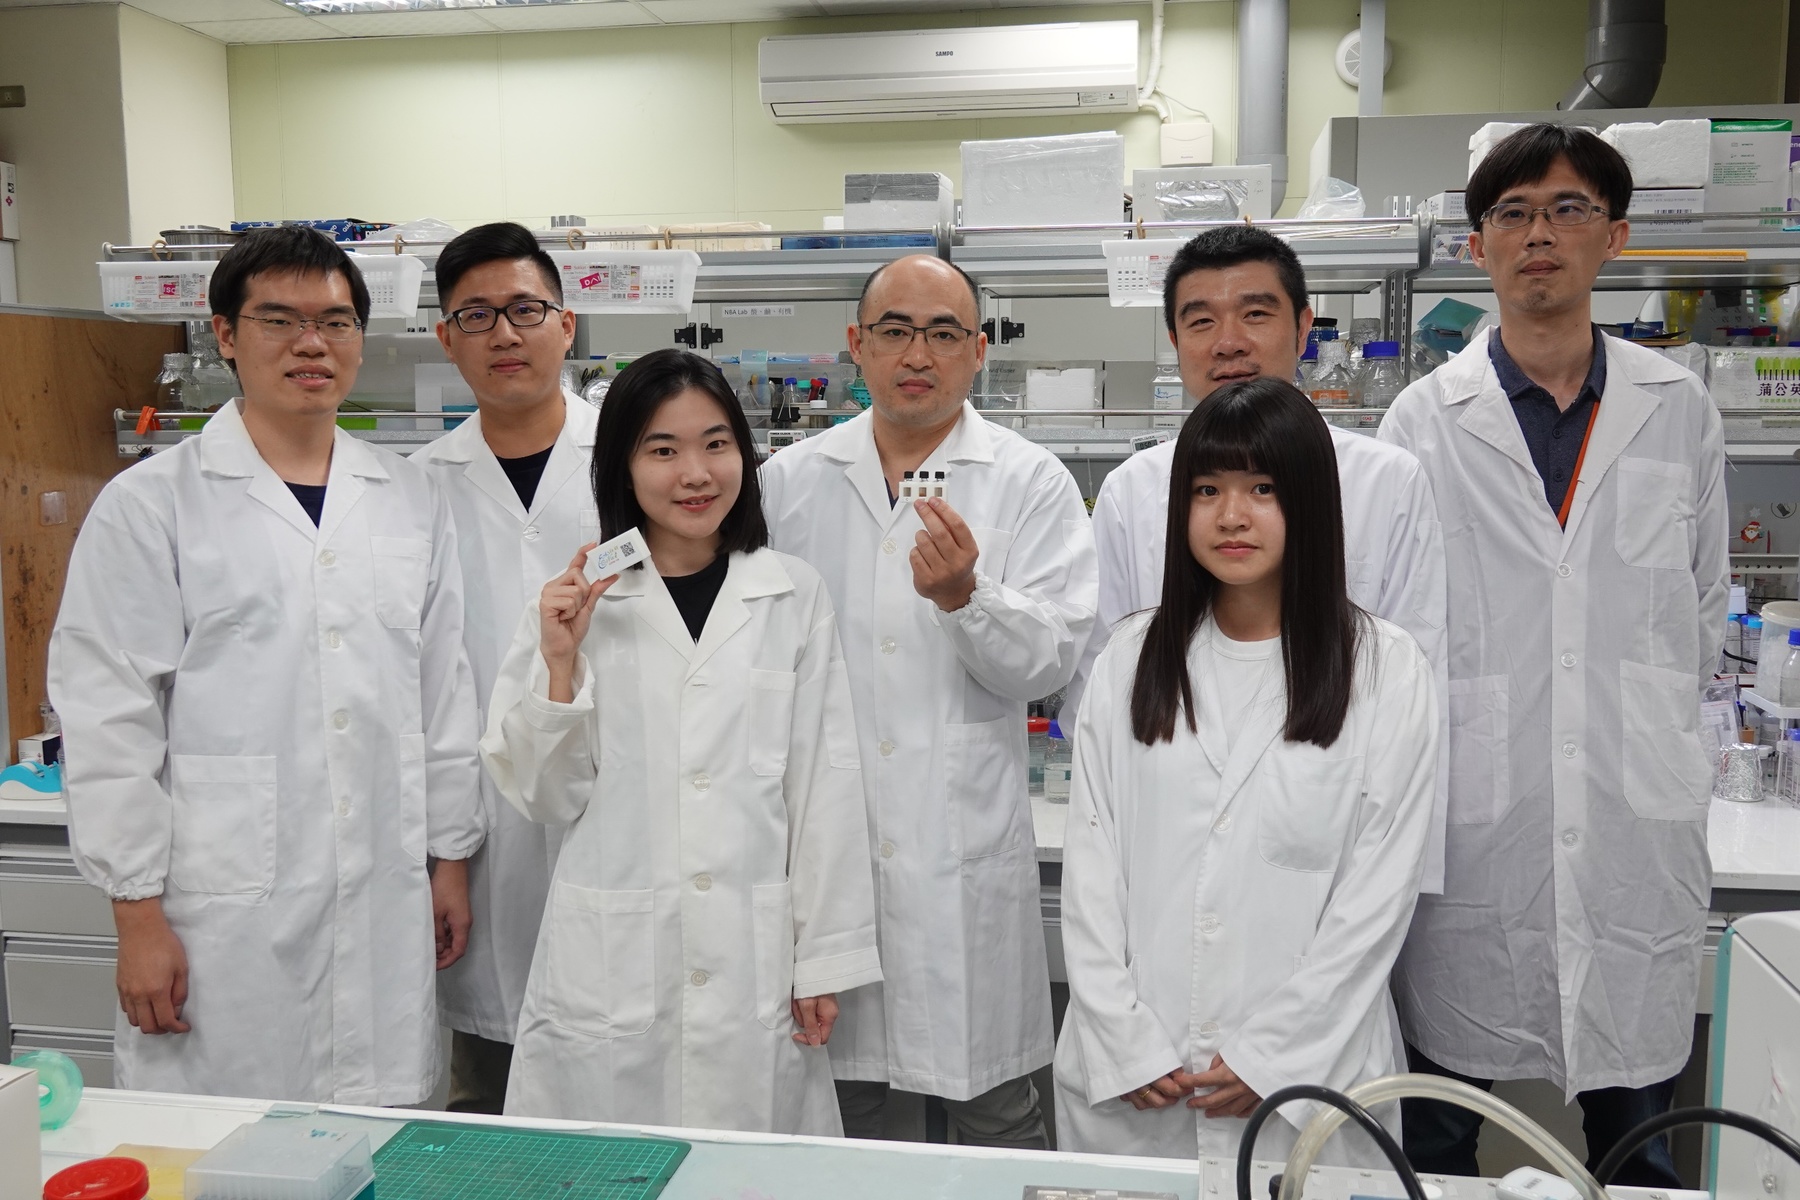 The team of Associate Professor Hung-Wei Yang (fourth on the left) of the Institute of Medical Science and Technology developed the ultra-sensitive measurement flask (EasyVial) and collaborated with the KMU team on a clinical trial with blind test verification that proved the high sensitivity of the developed technology that allows the detection of antibodies even in asymptomatic patients in an early stage of infection.